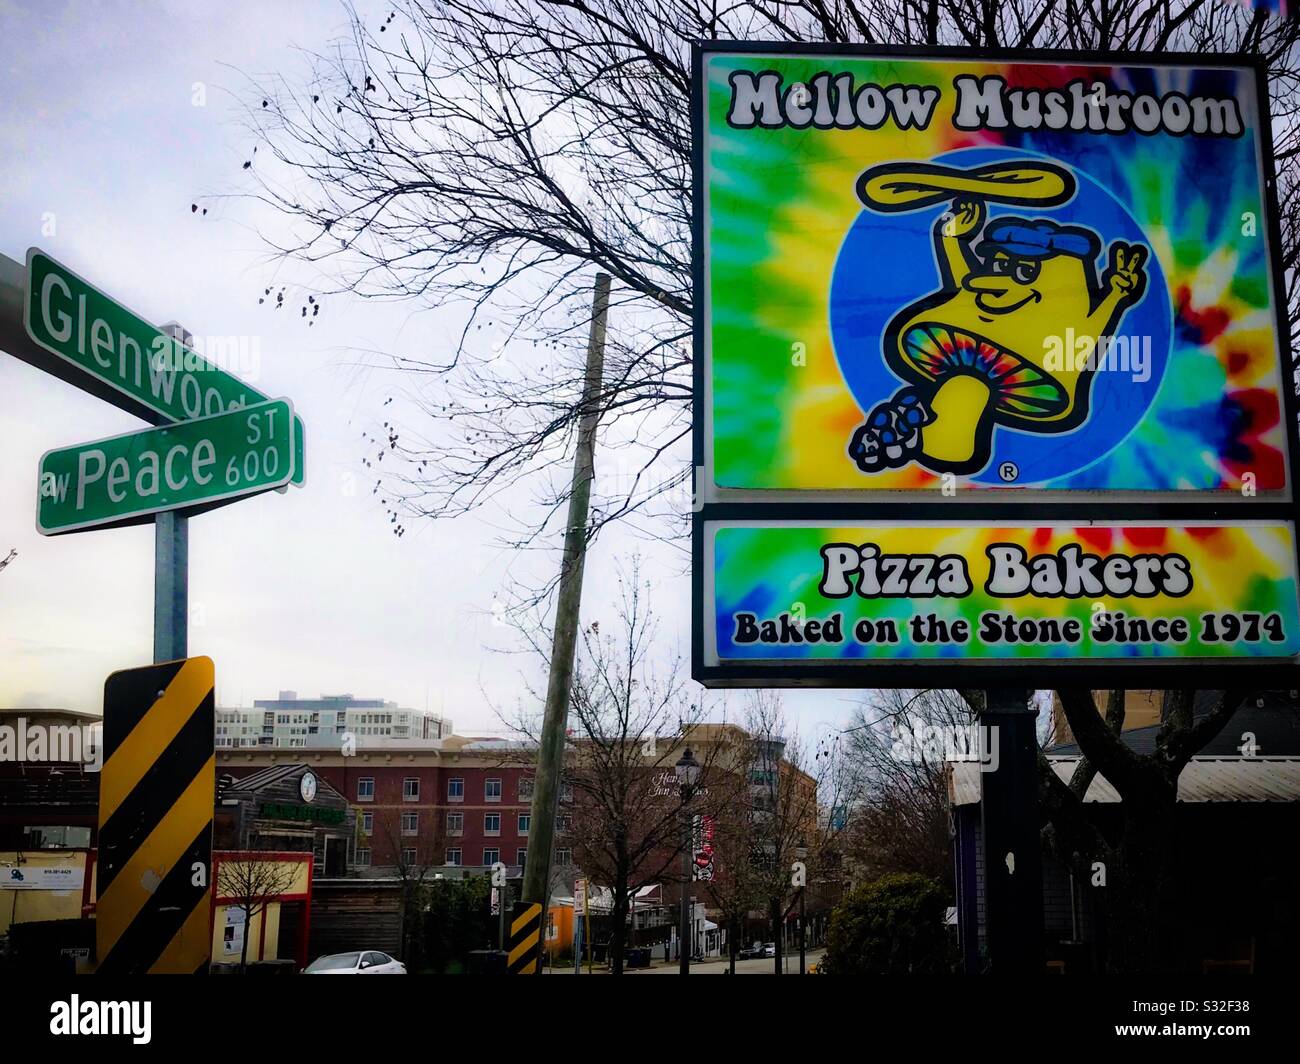 Colorfully psychedelic Mellow Mushroom sign on Peace Street, Raleigh, North Carolina Stock Photo